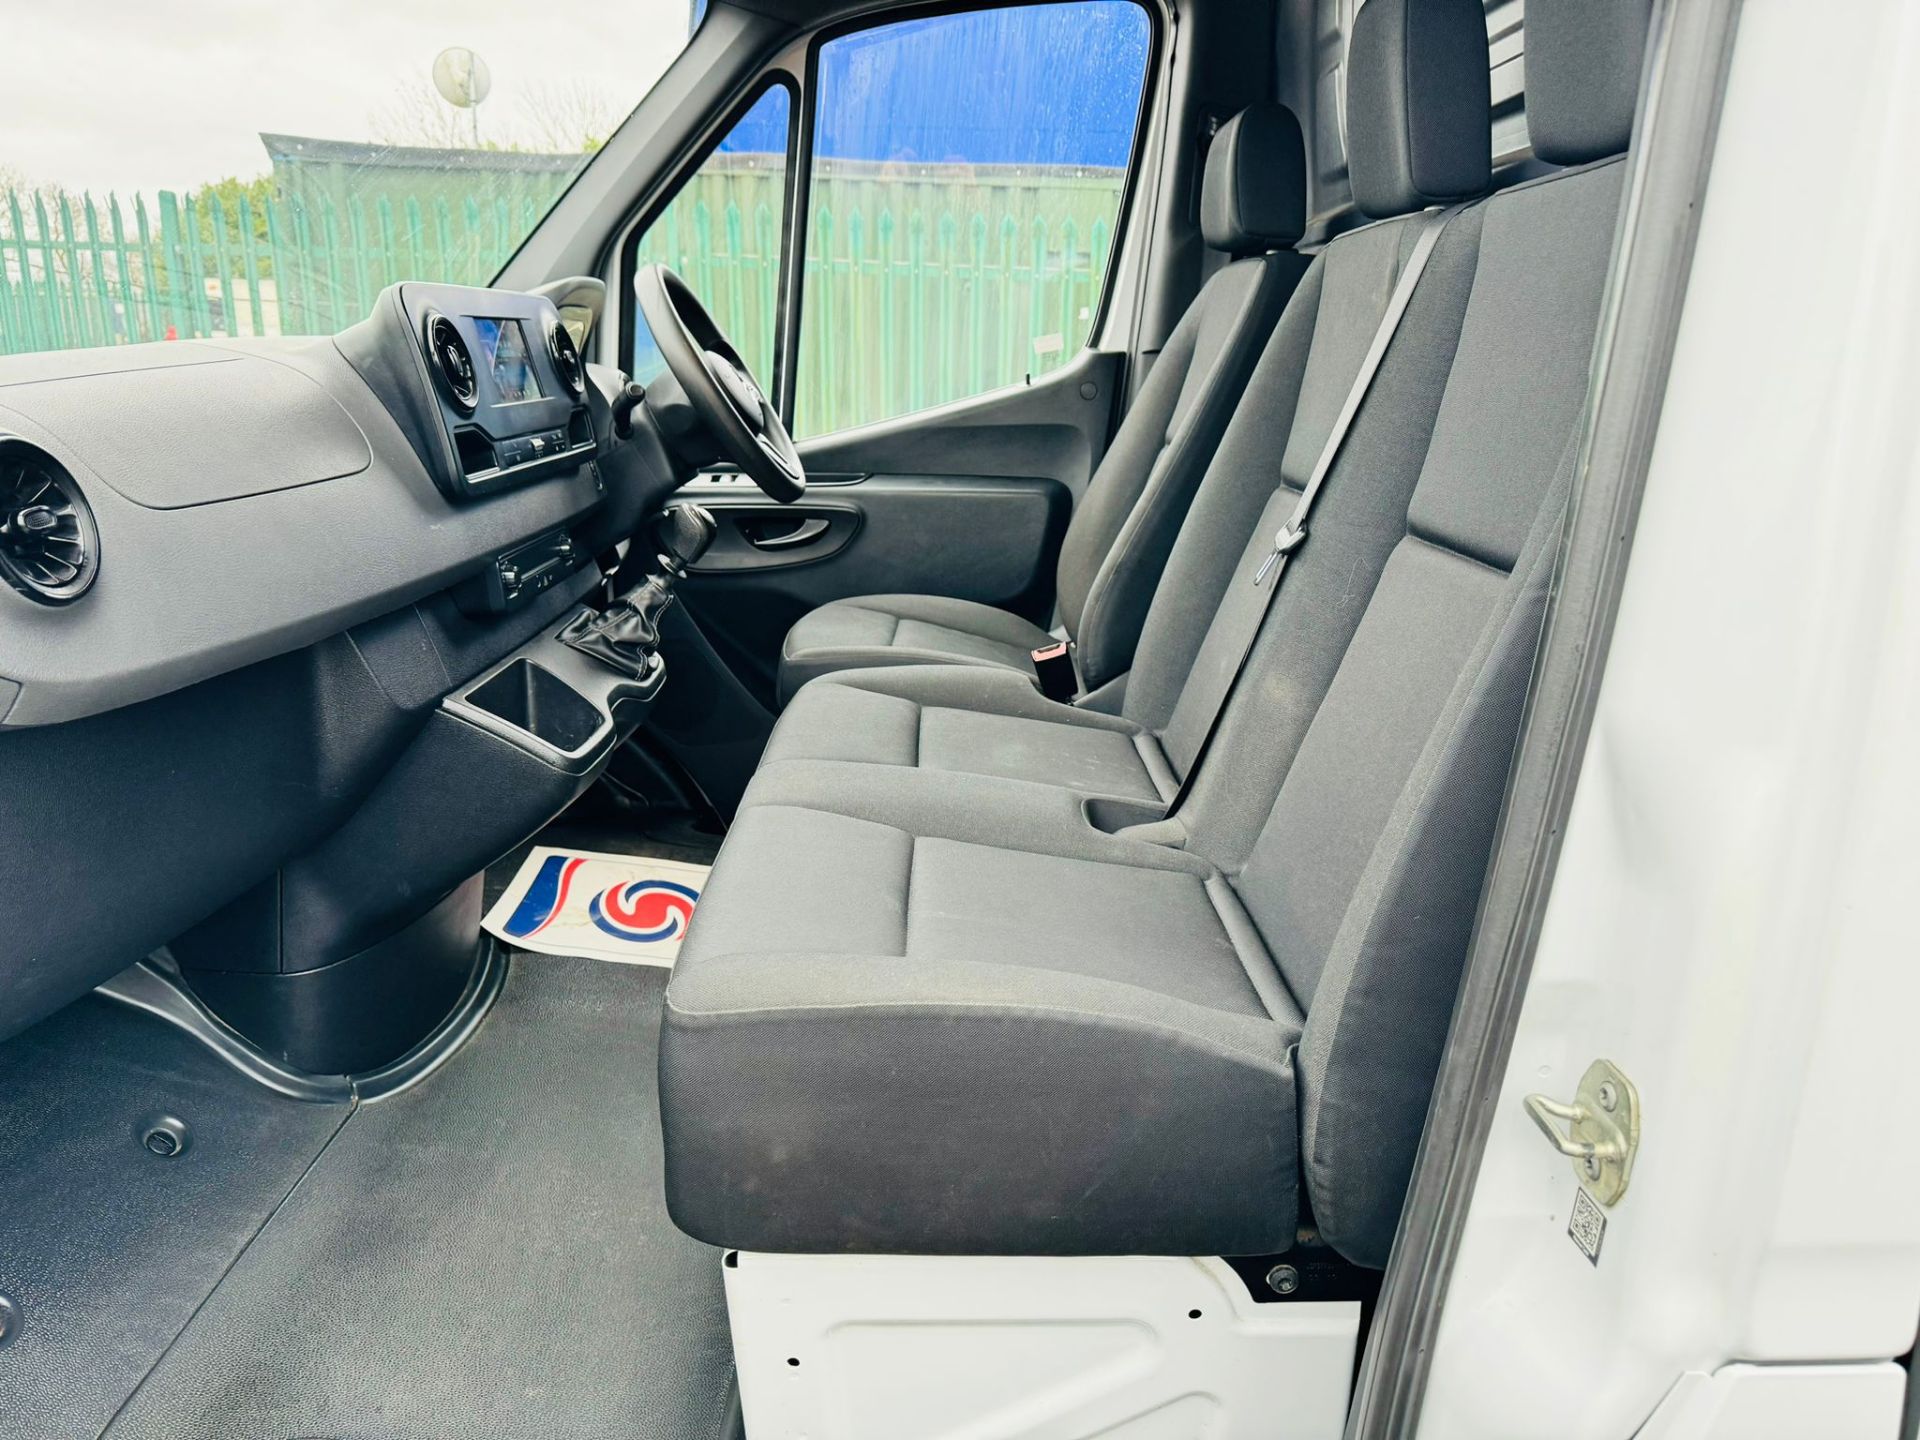 MERCEDES SPRINTER 314CDI MWB HI ROOF - 2019 19 Reg - 1 Owner From New - Euro 6 - NEW SHAPE!! - Image 5 of 8